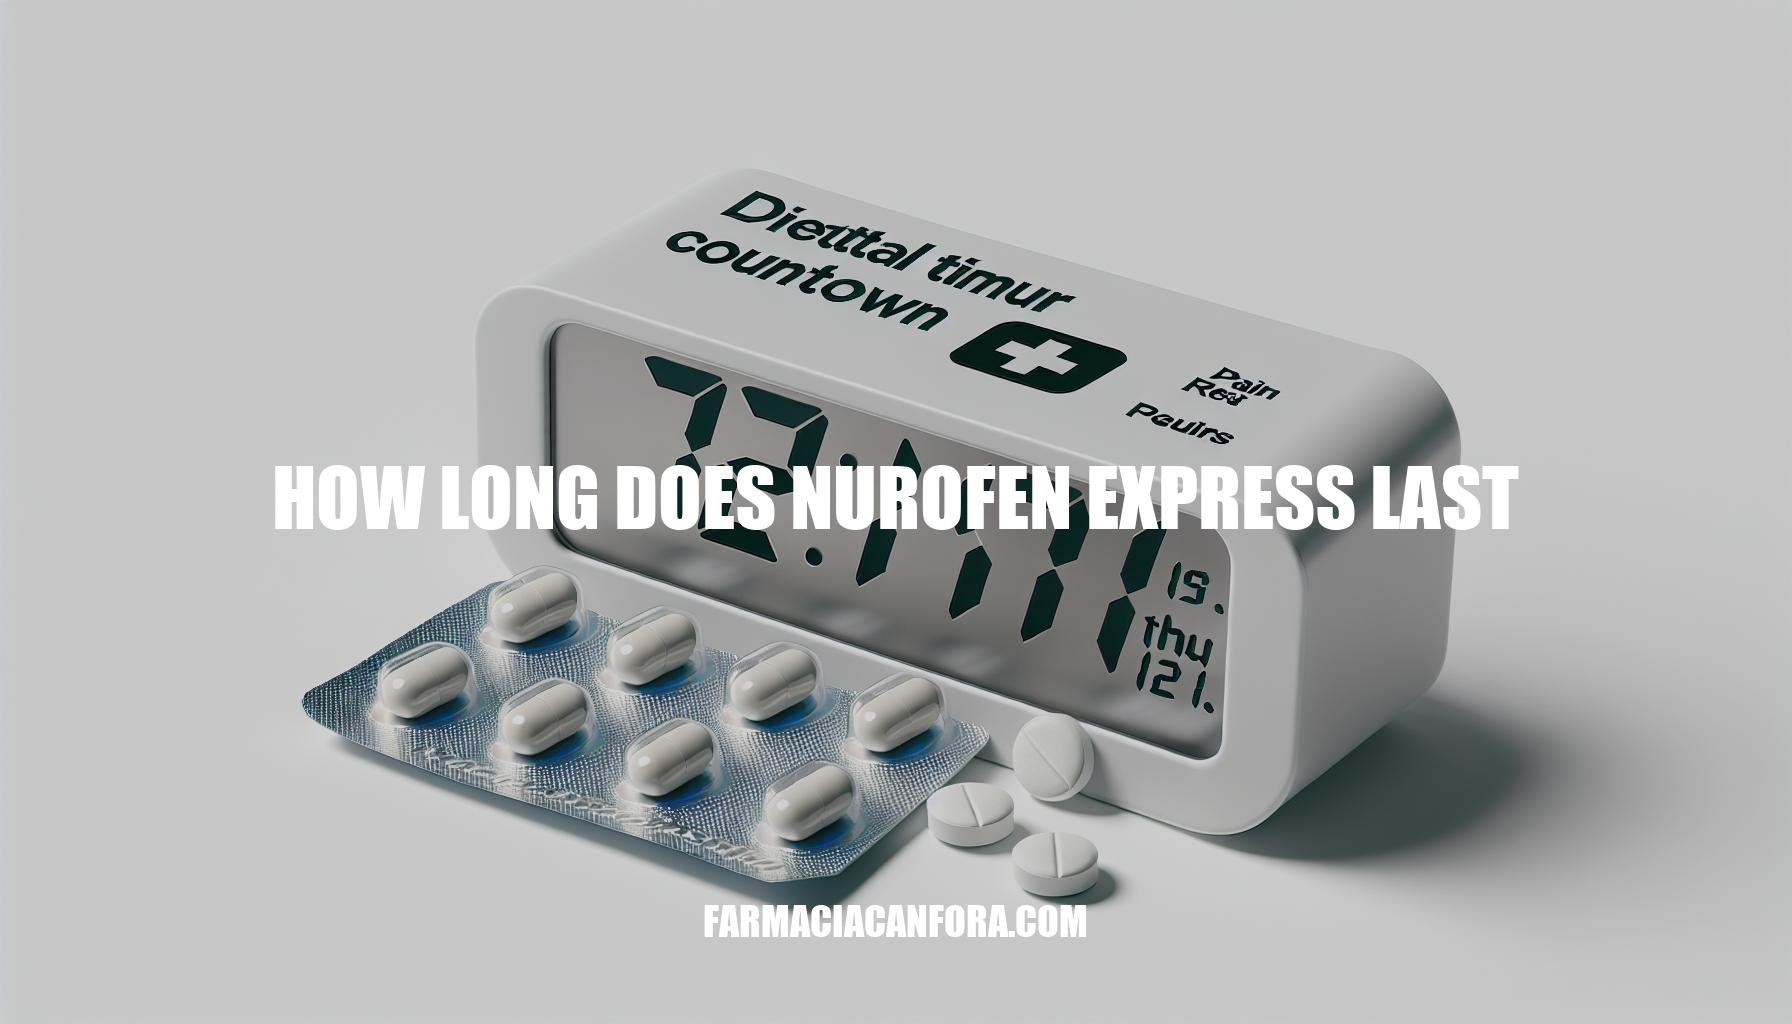 Nurofen Express: How Long Does It Last? A Guide to Fast-Acting Pain Relief